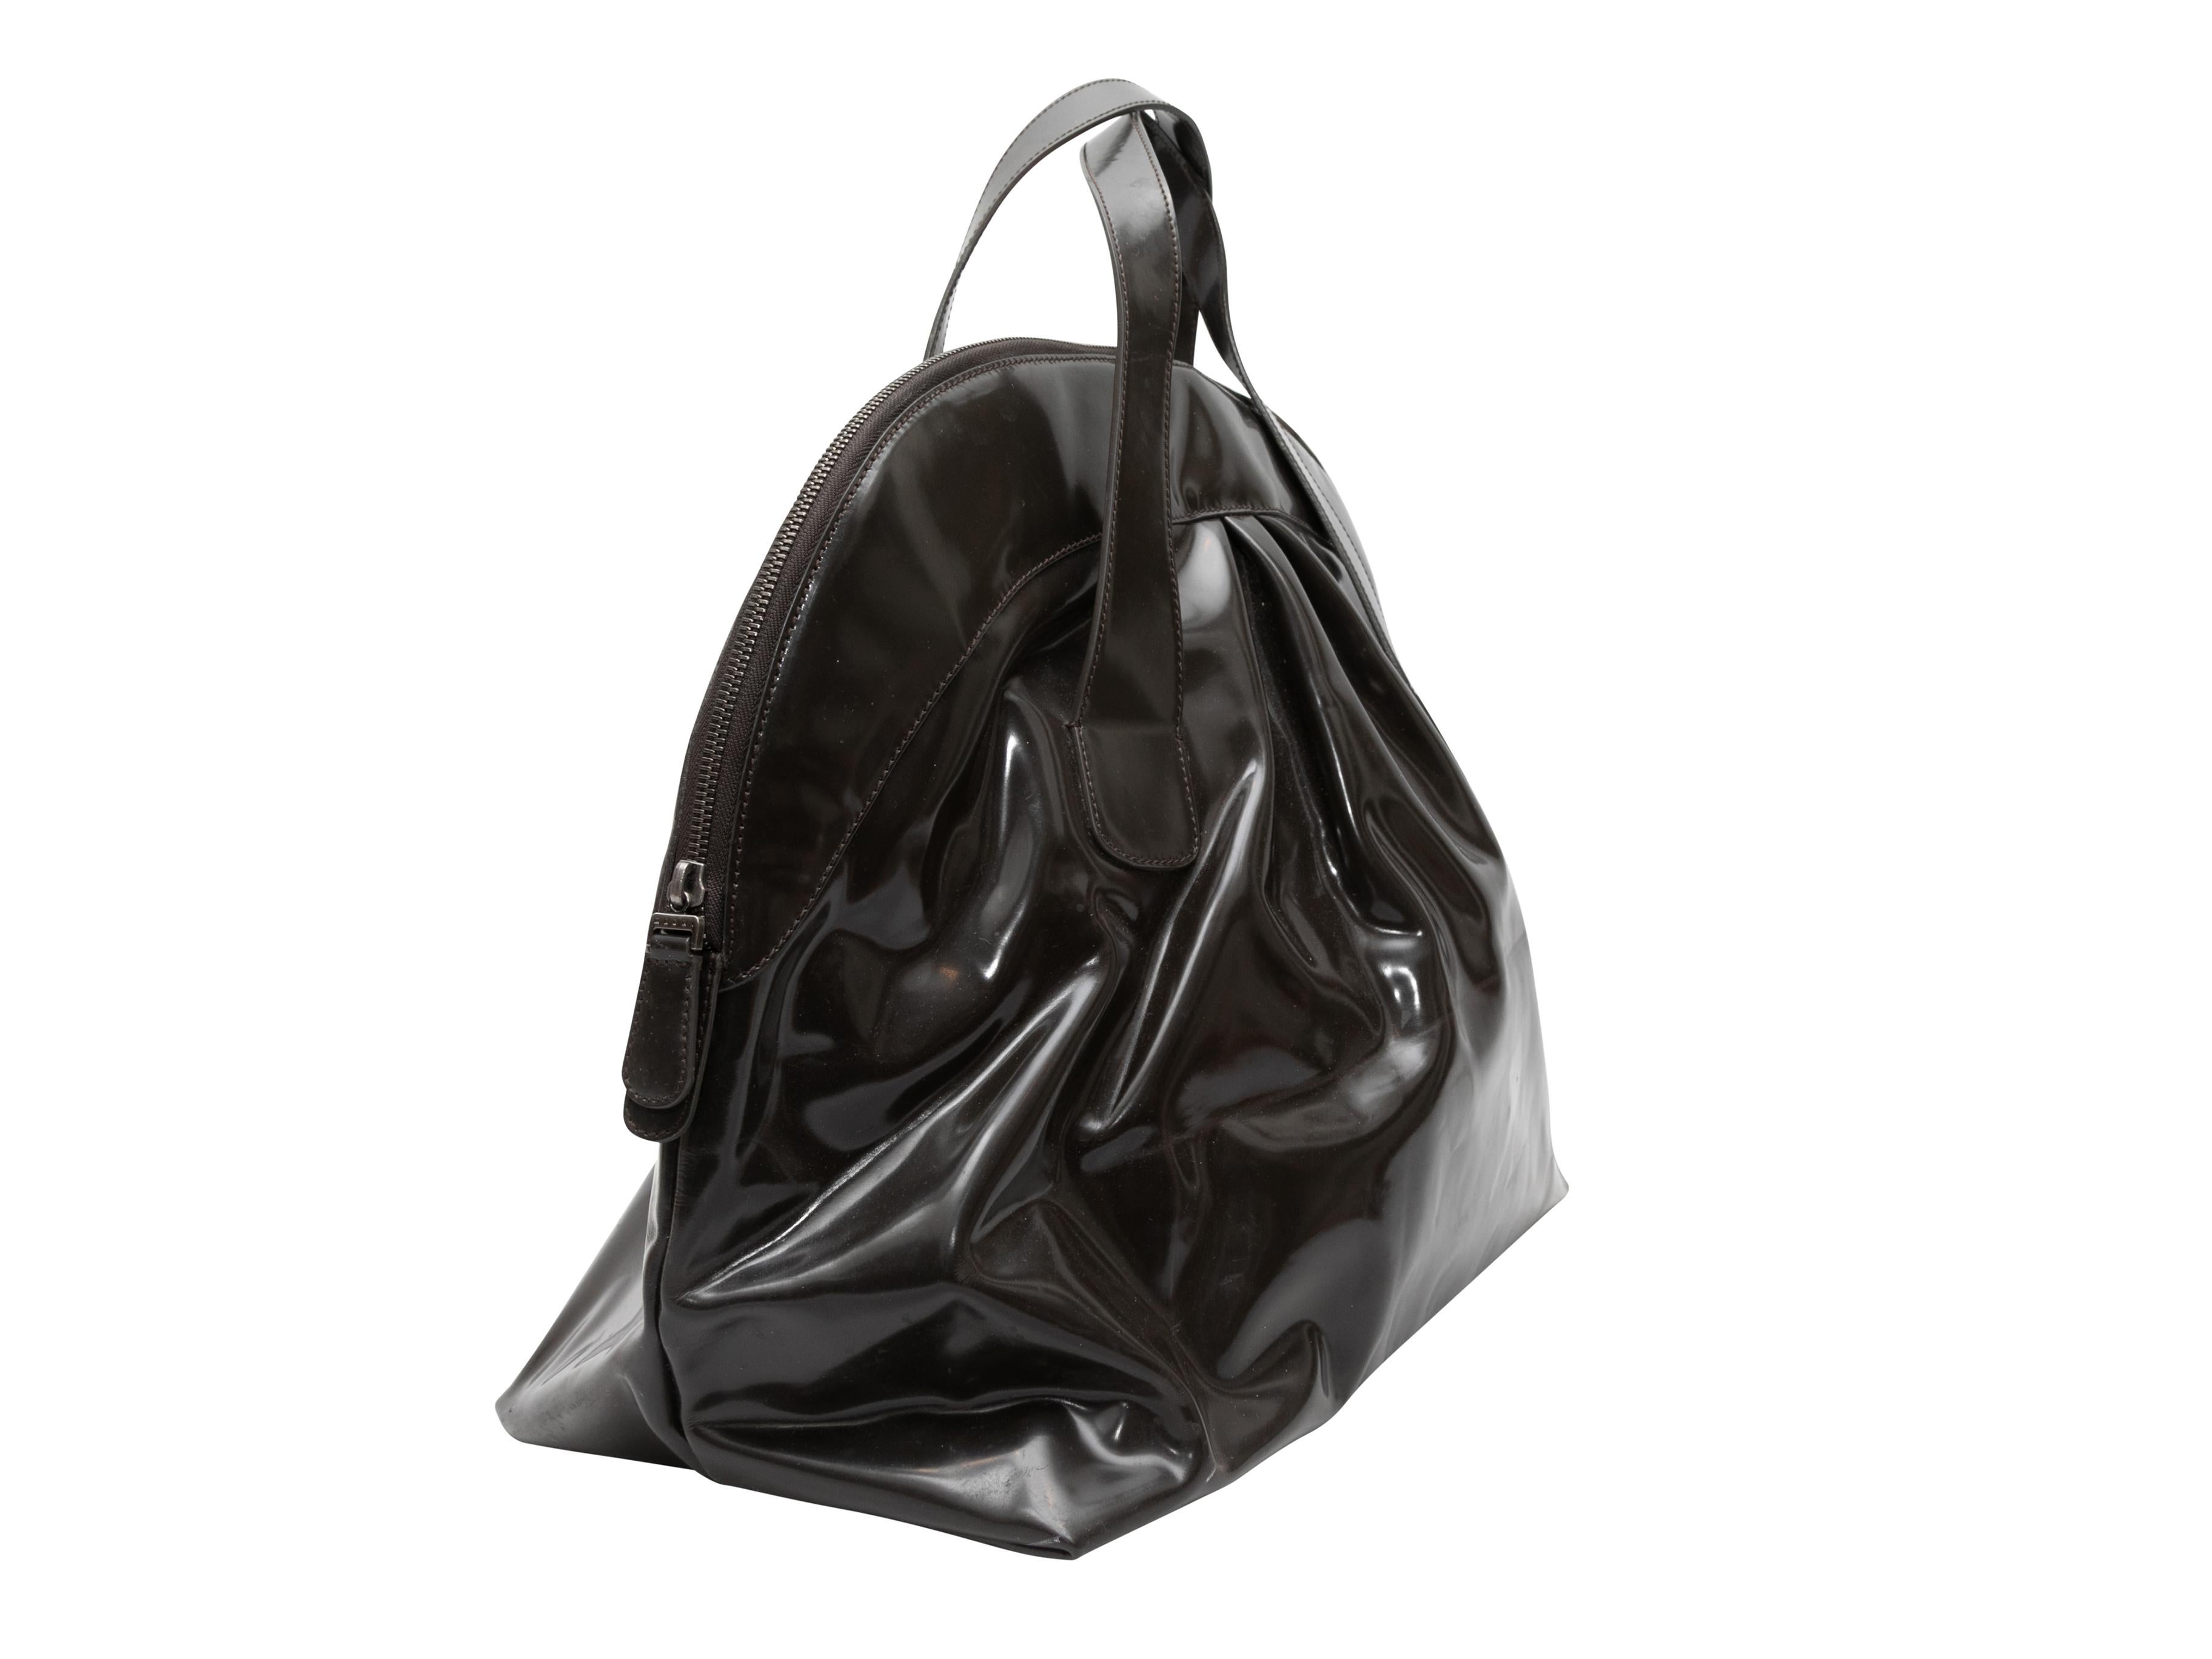 Black Marni Patent Top Handle Bowler Bag In Fair Condition For Sale In New York, NY